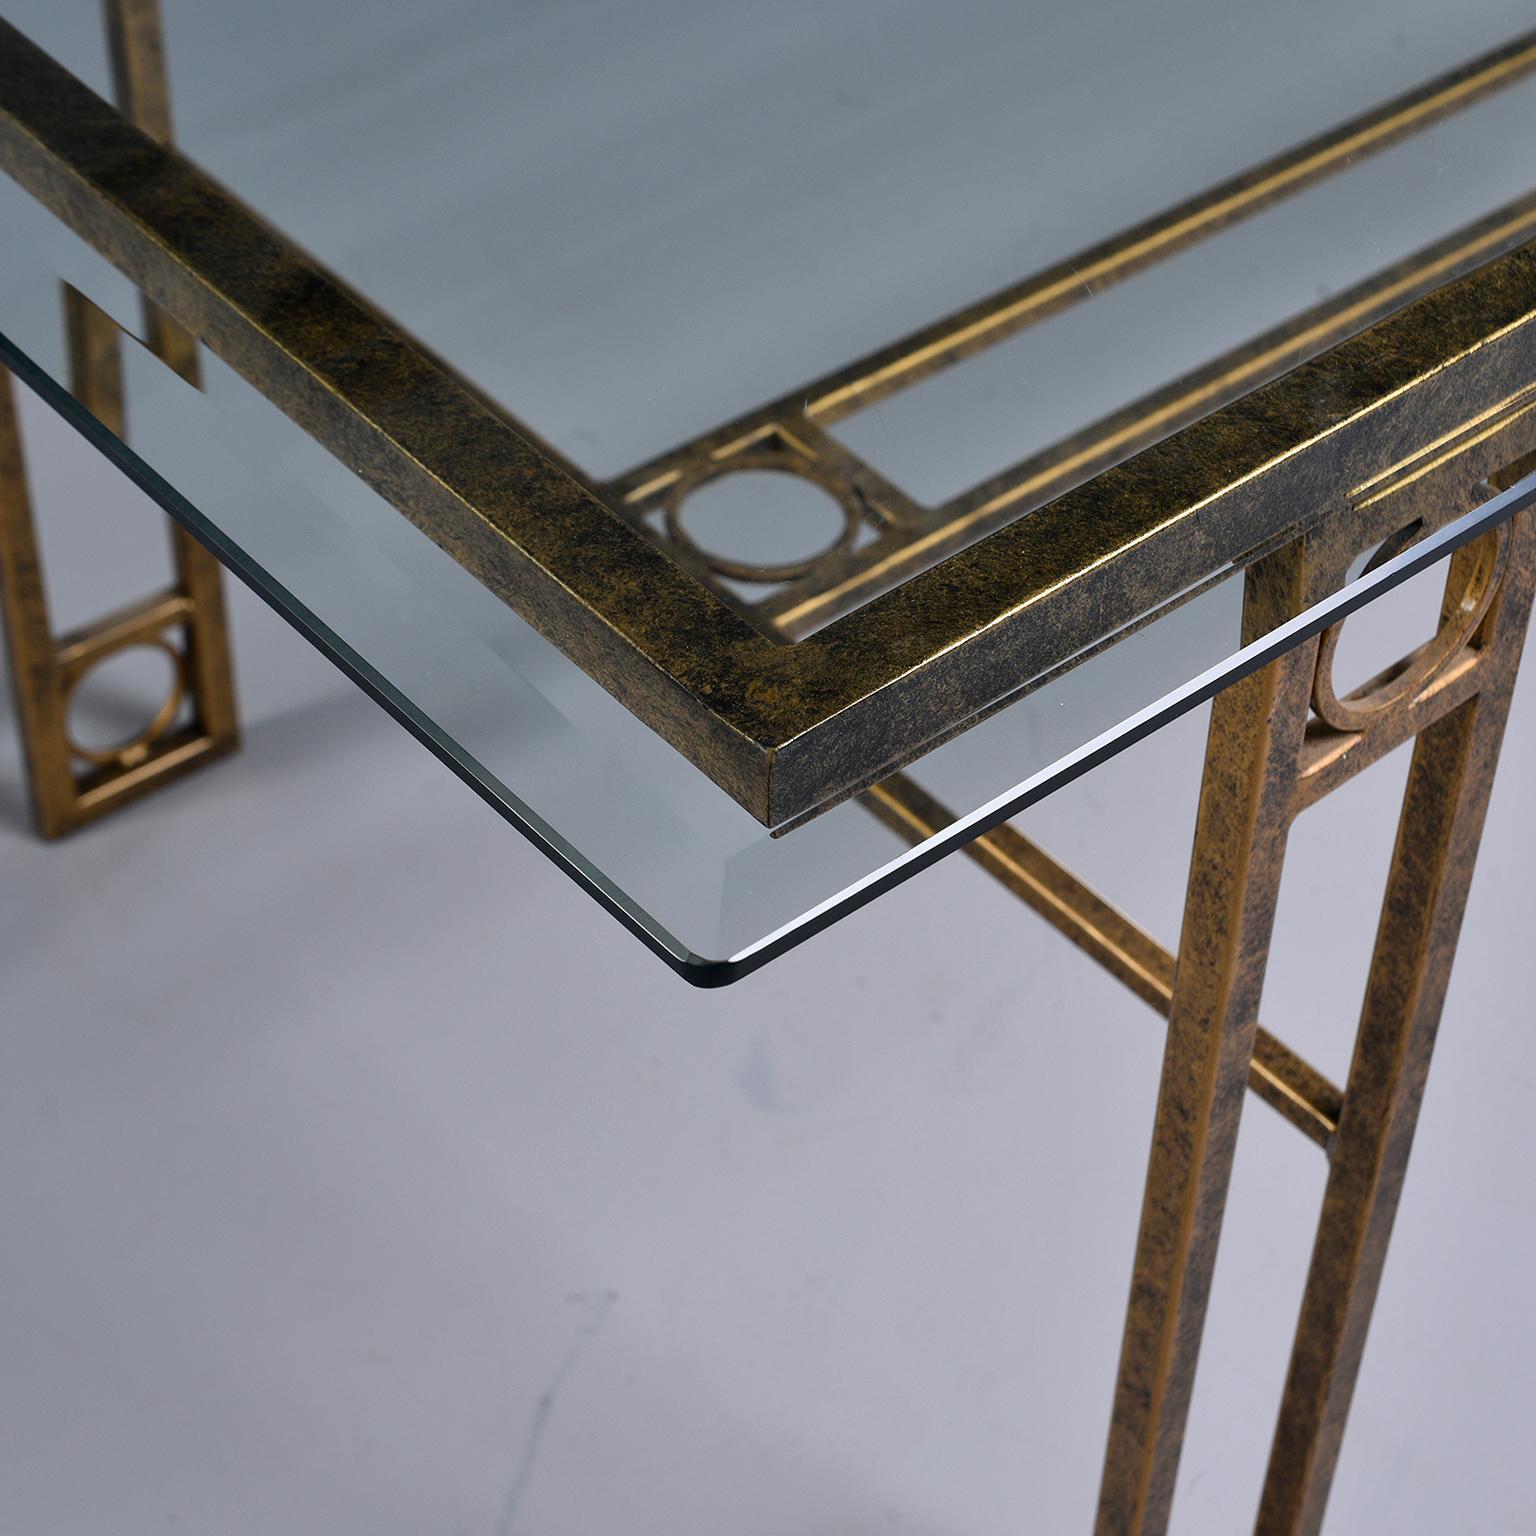 Dining table has an iron base with a burnished gold finish and open work design of rectangles and circles. Rectangular glass top has beveled edge and is in very good vintage condition. Unknown maker. Found in England, circa 1970s.